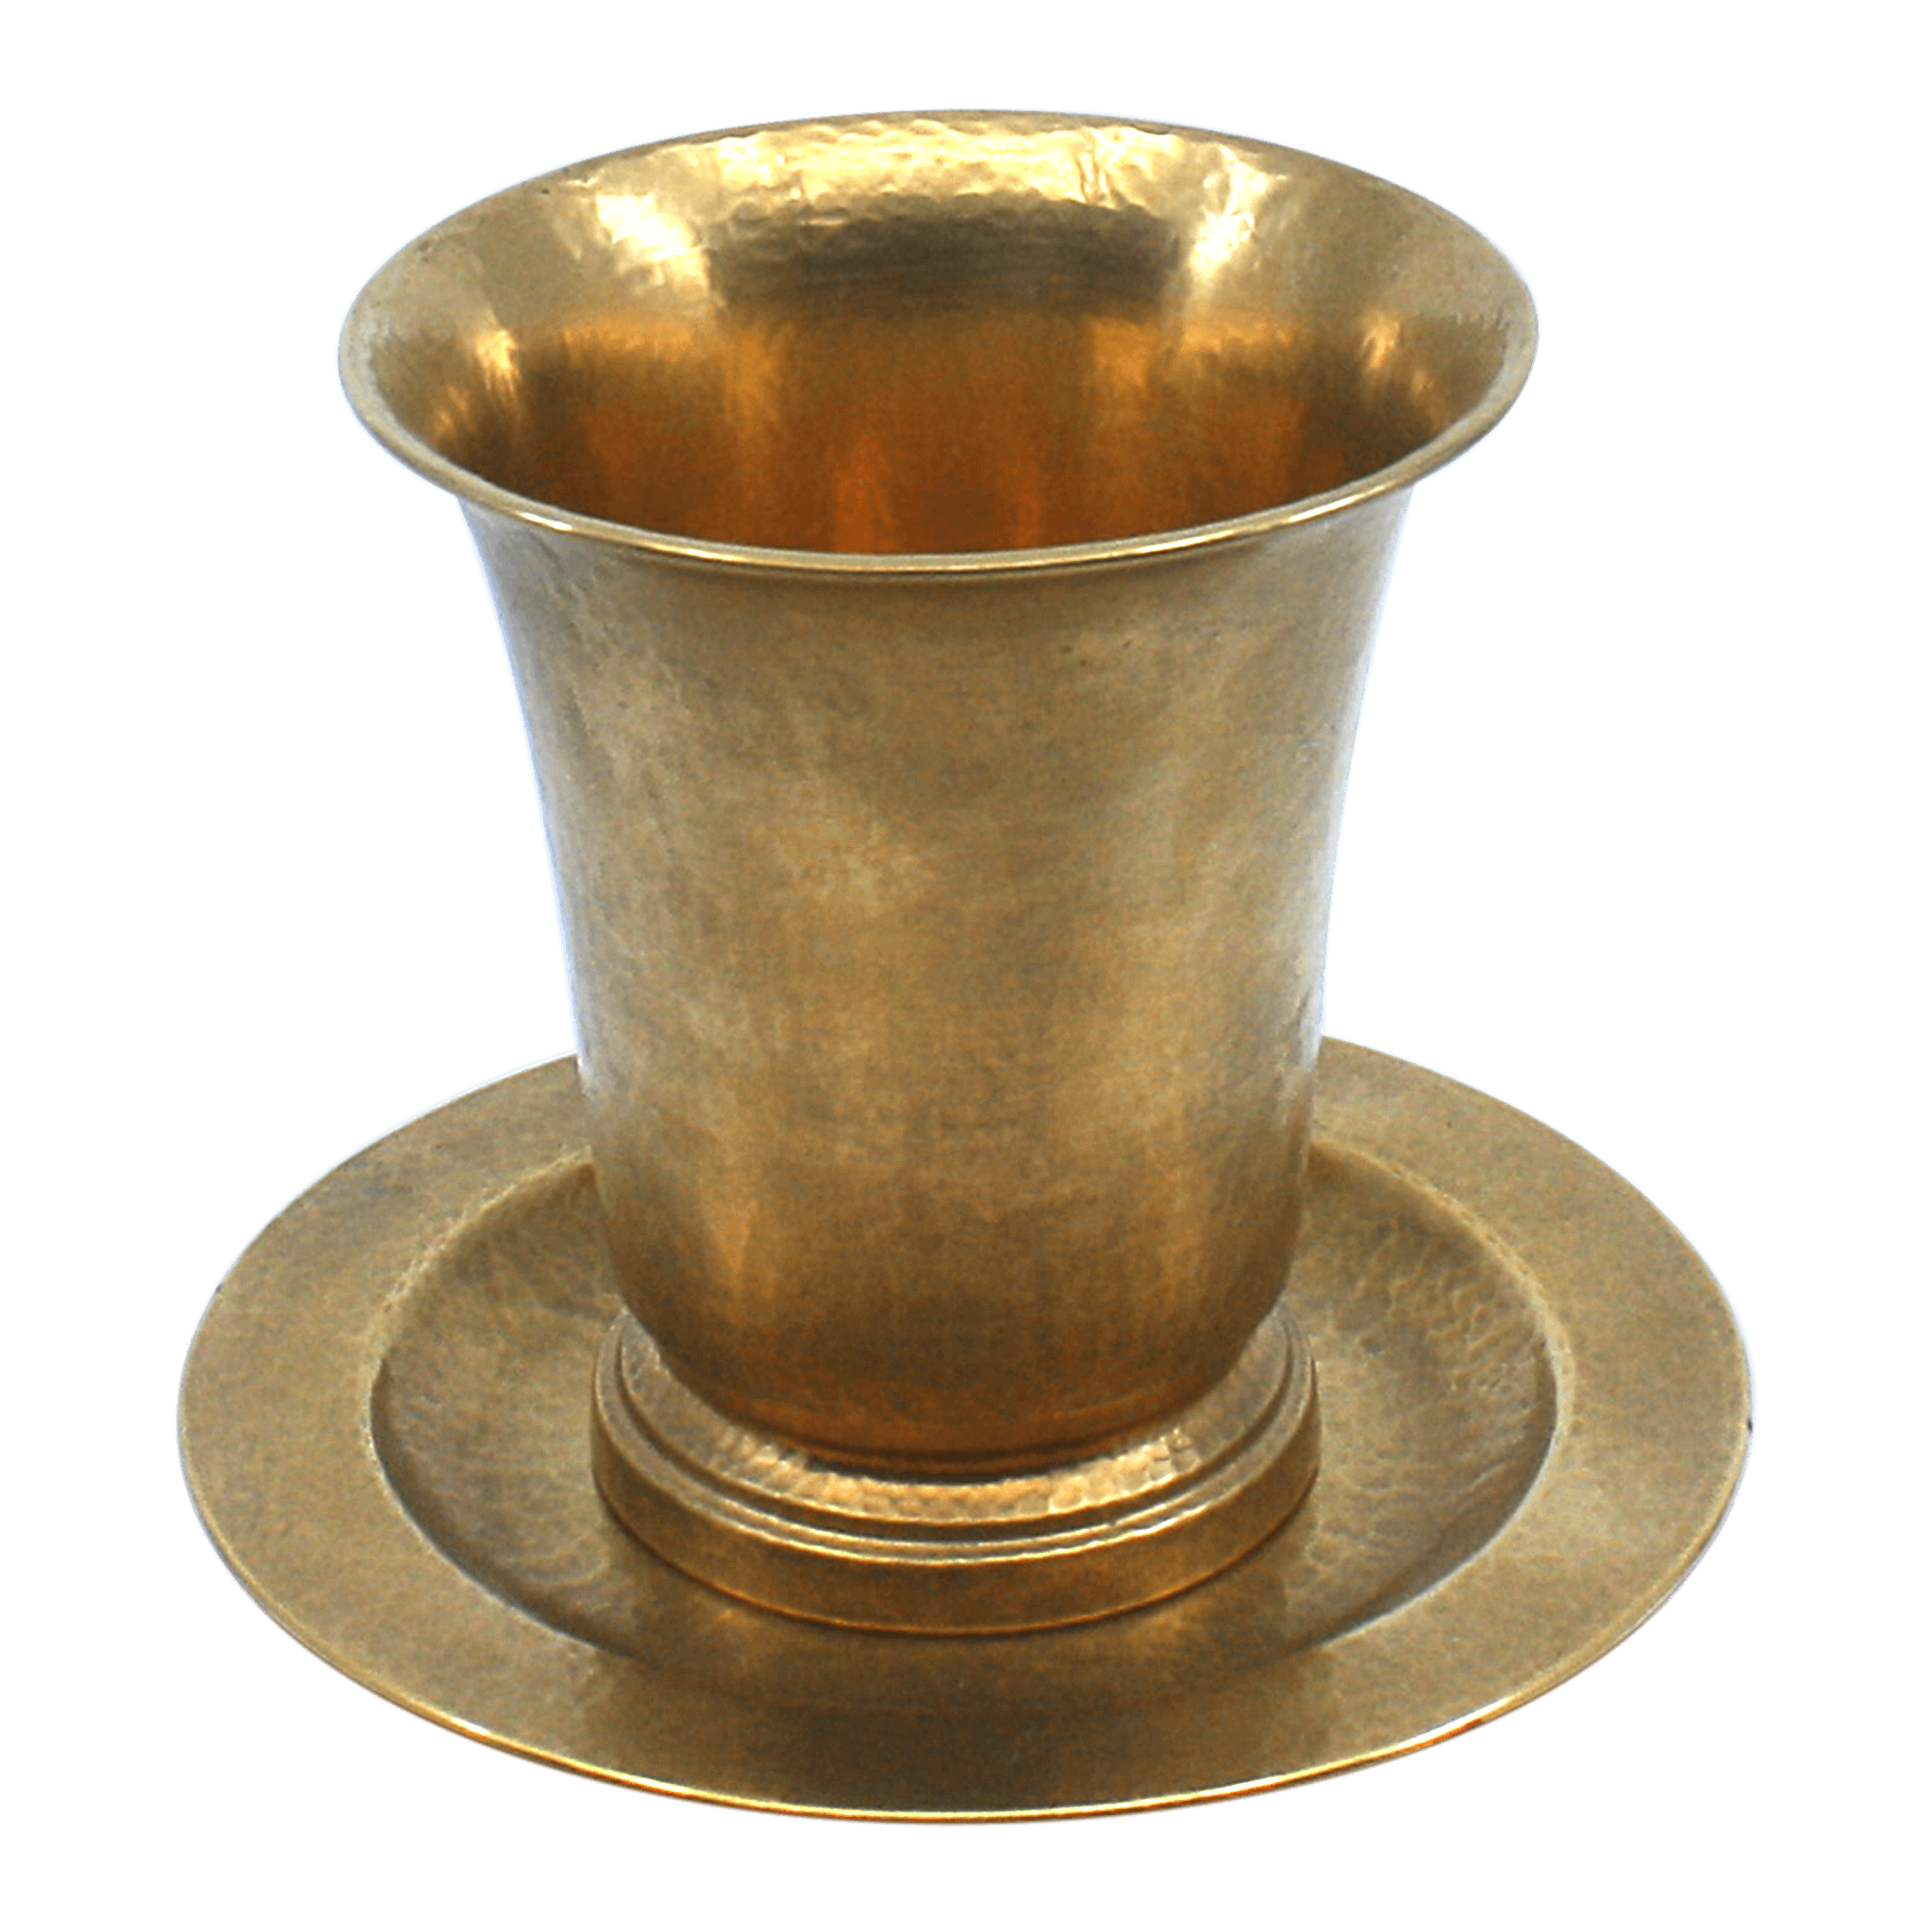 Gold plated Sterling Silver Small Cup and Tray 6924 at $1150.00 - Piece By Zion Hadad